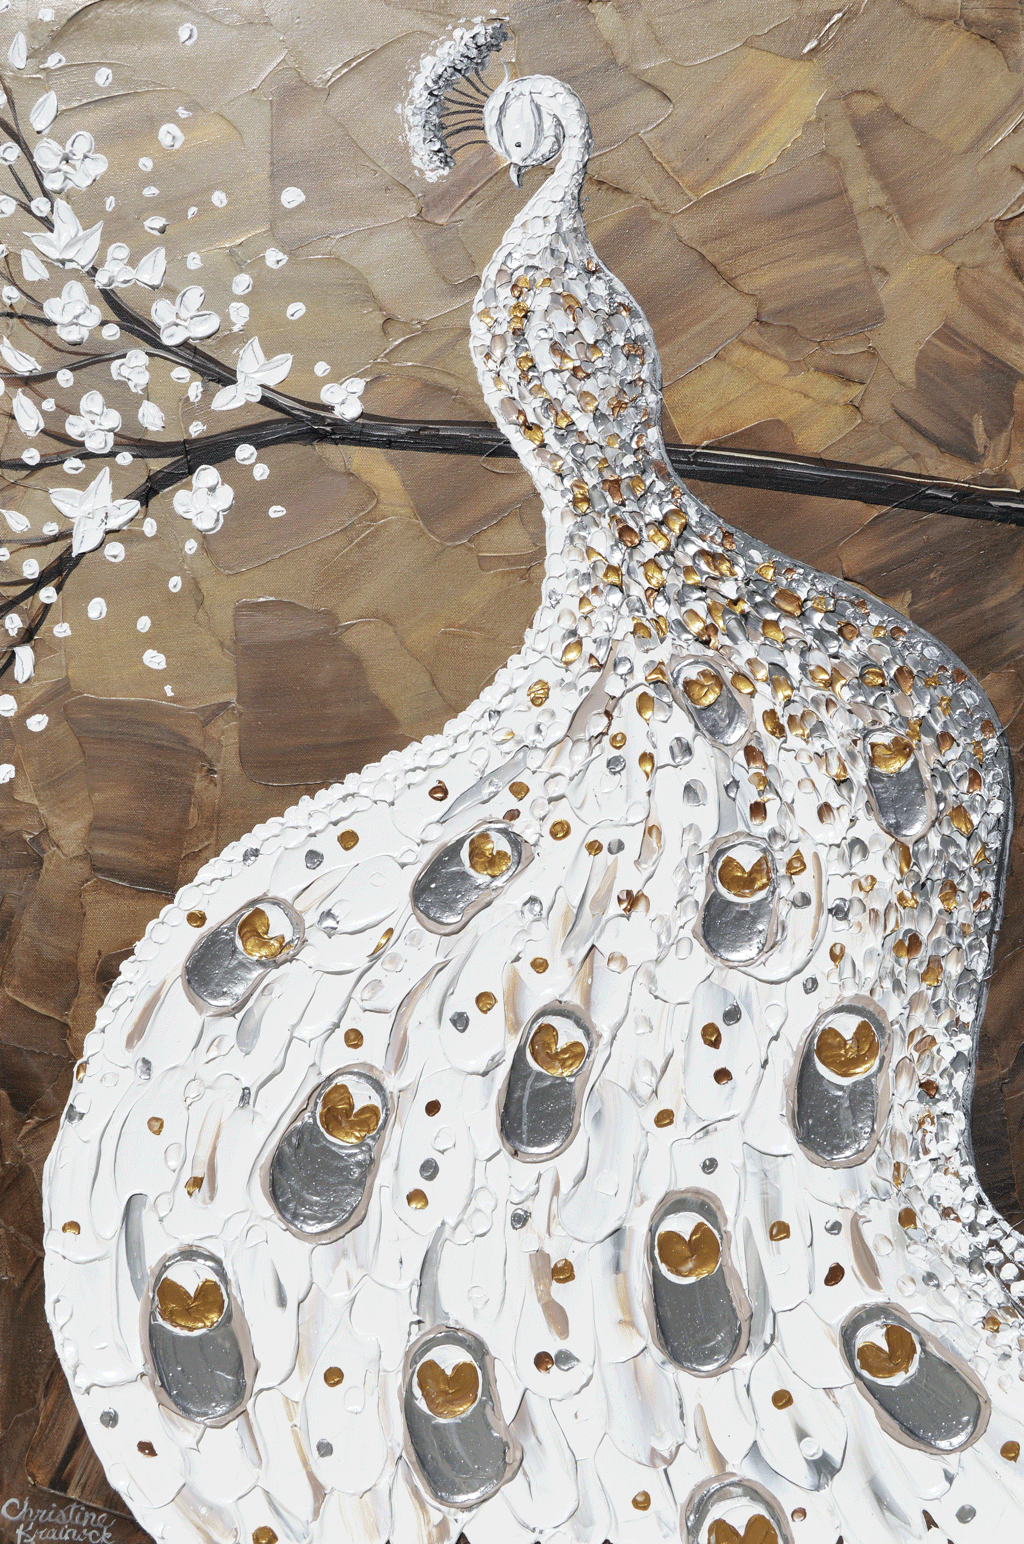 Load image into Gallery viewer, GICLEE PRINT Art White Peacock Painting Abstract Large Canvas Prints Blossoms Brown Silver Gold - Christine Krainock Art - Contemporary Art by Christine - 4
